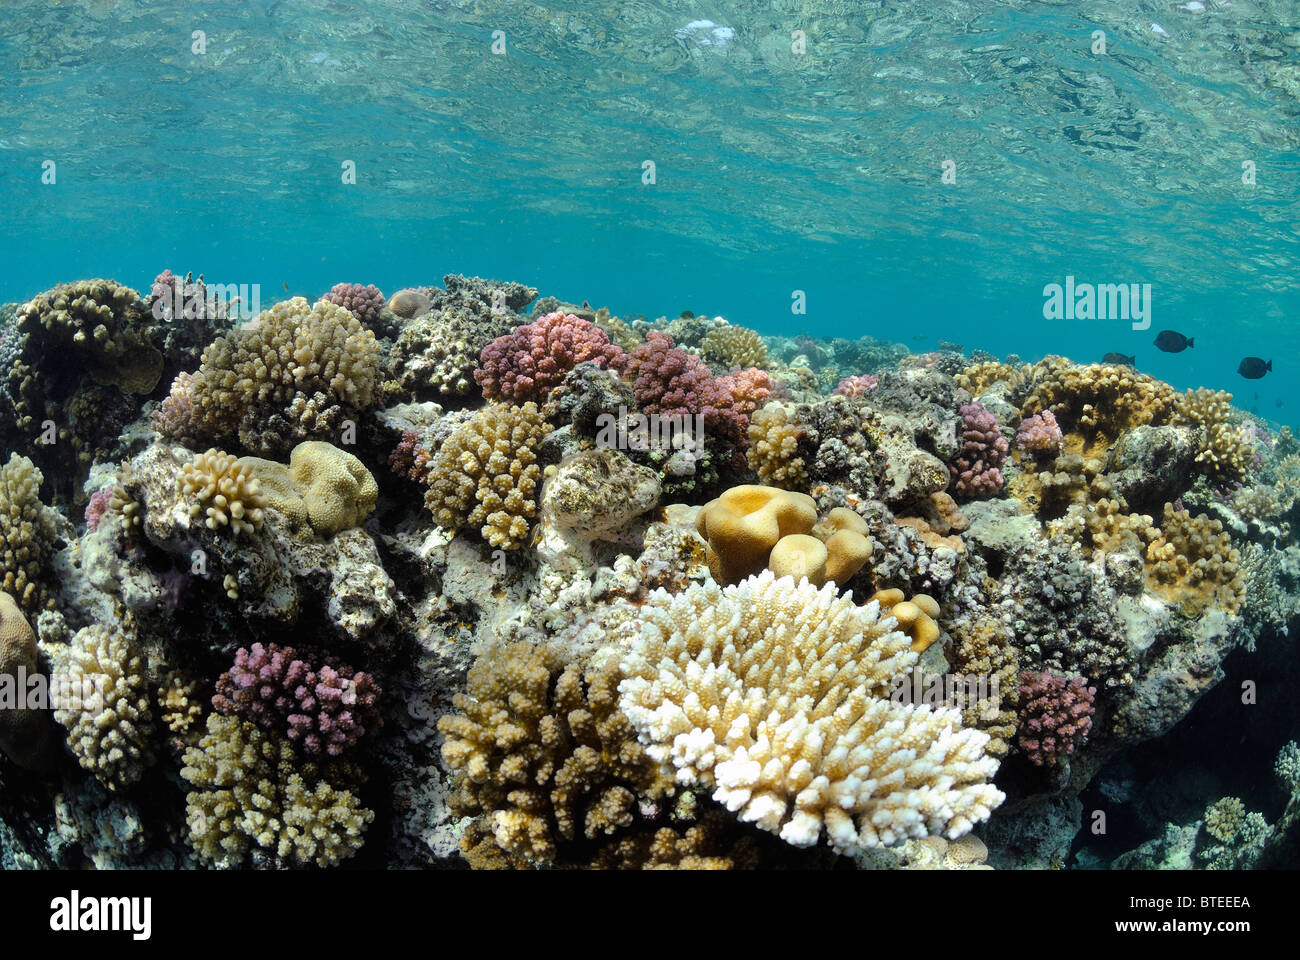 Coral reef in the Red Sea, off Safaga, Egypt Stock Photo - Alamy